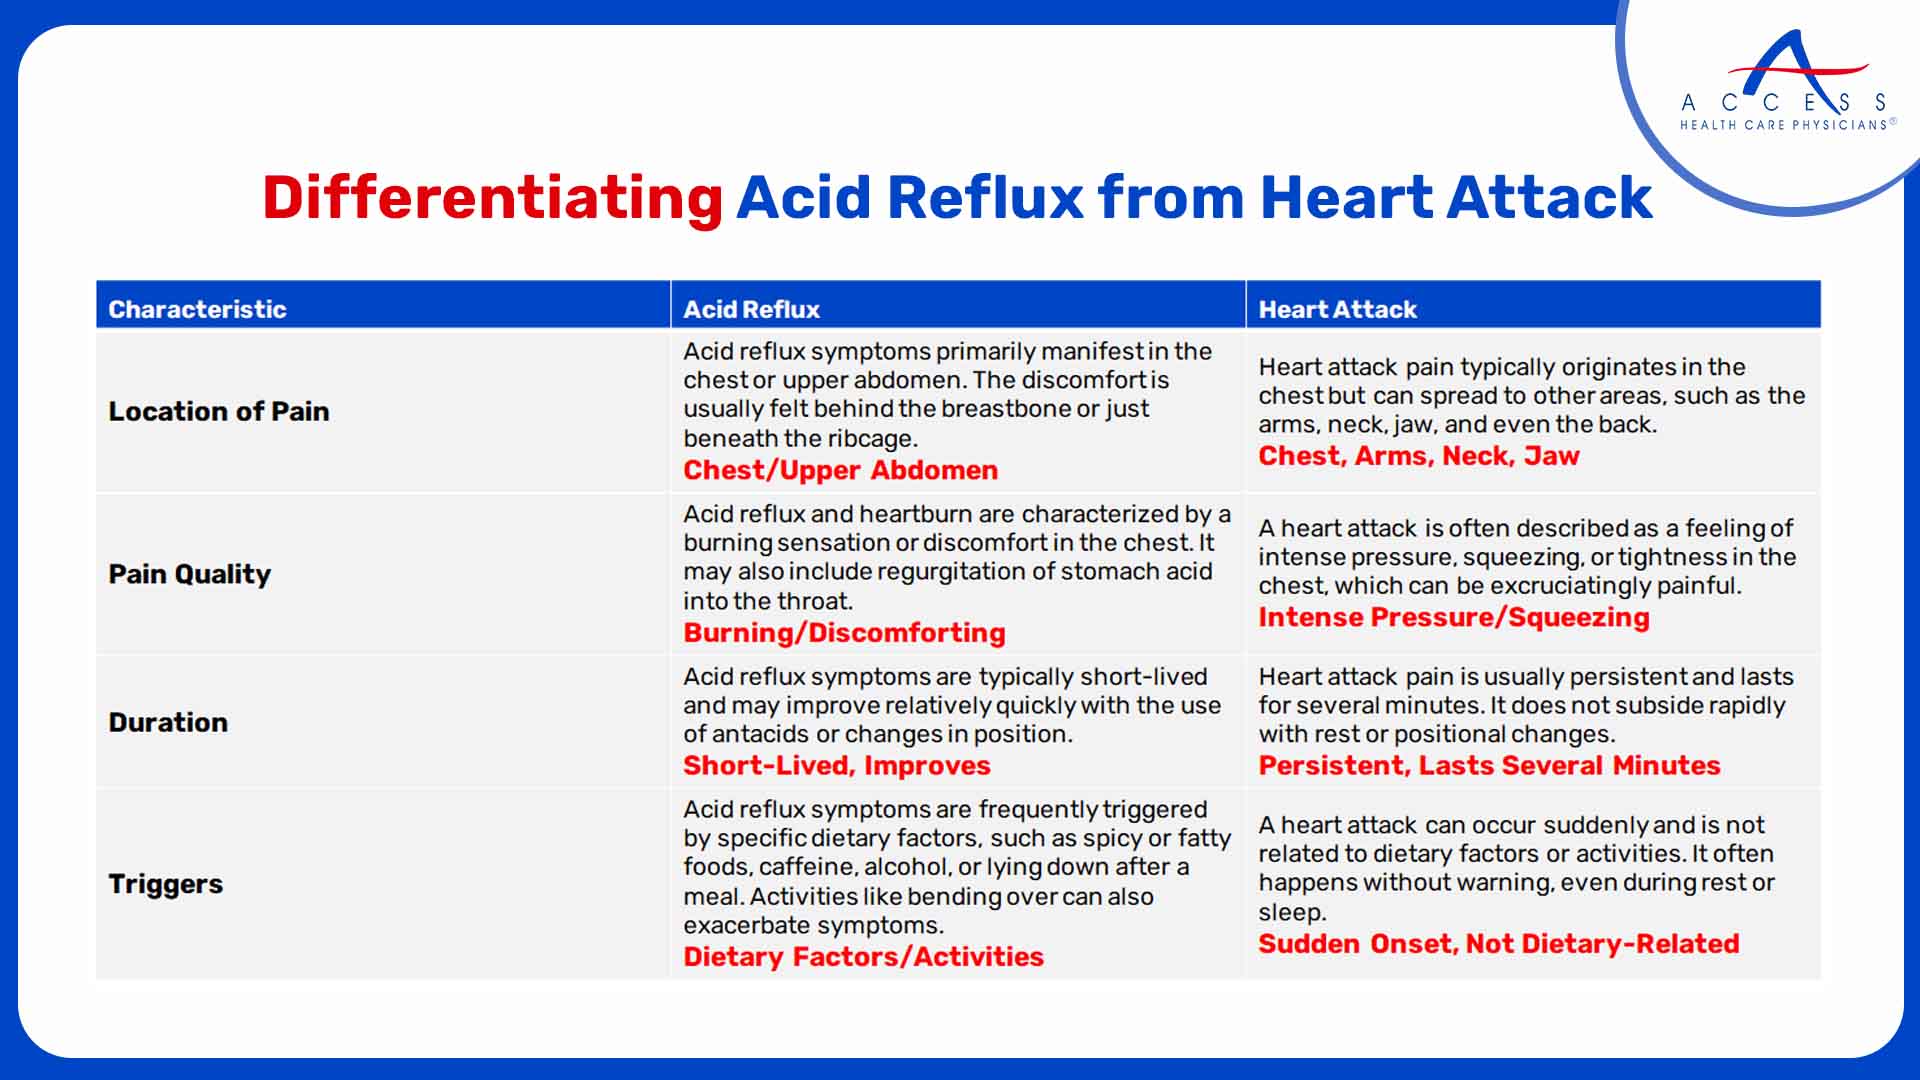 Differentiating Acid Reflux from Heart Attack